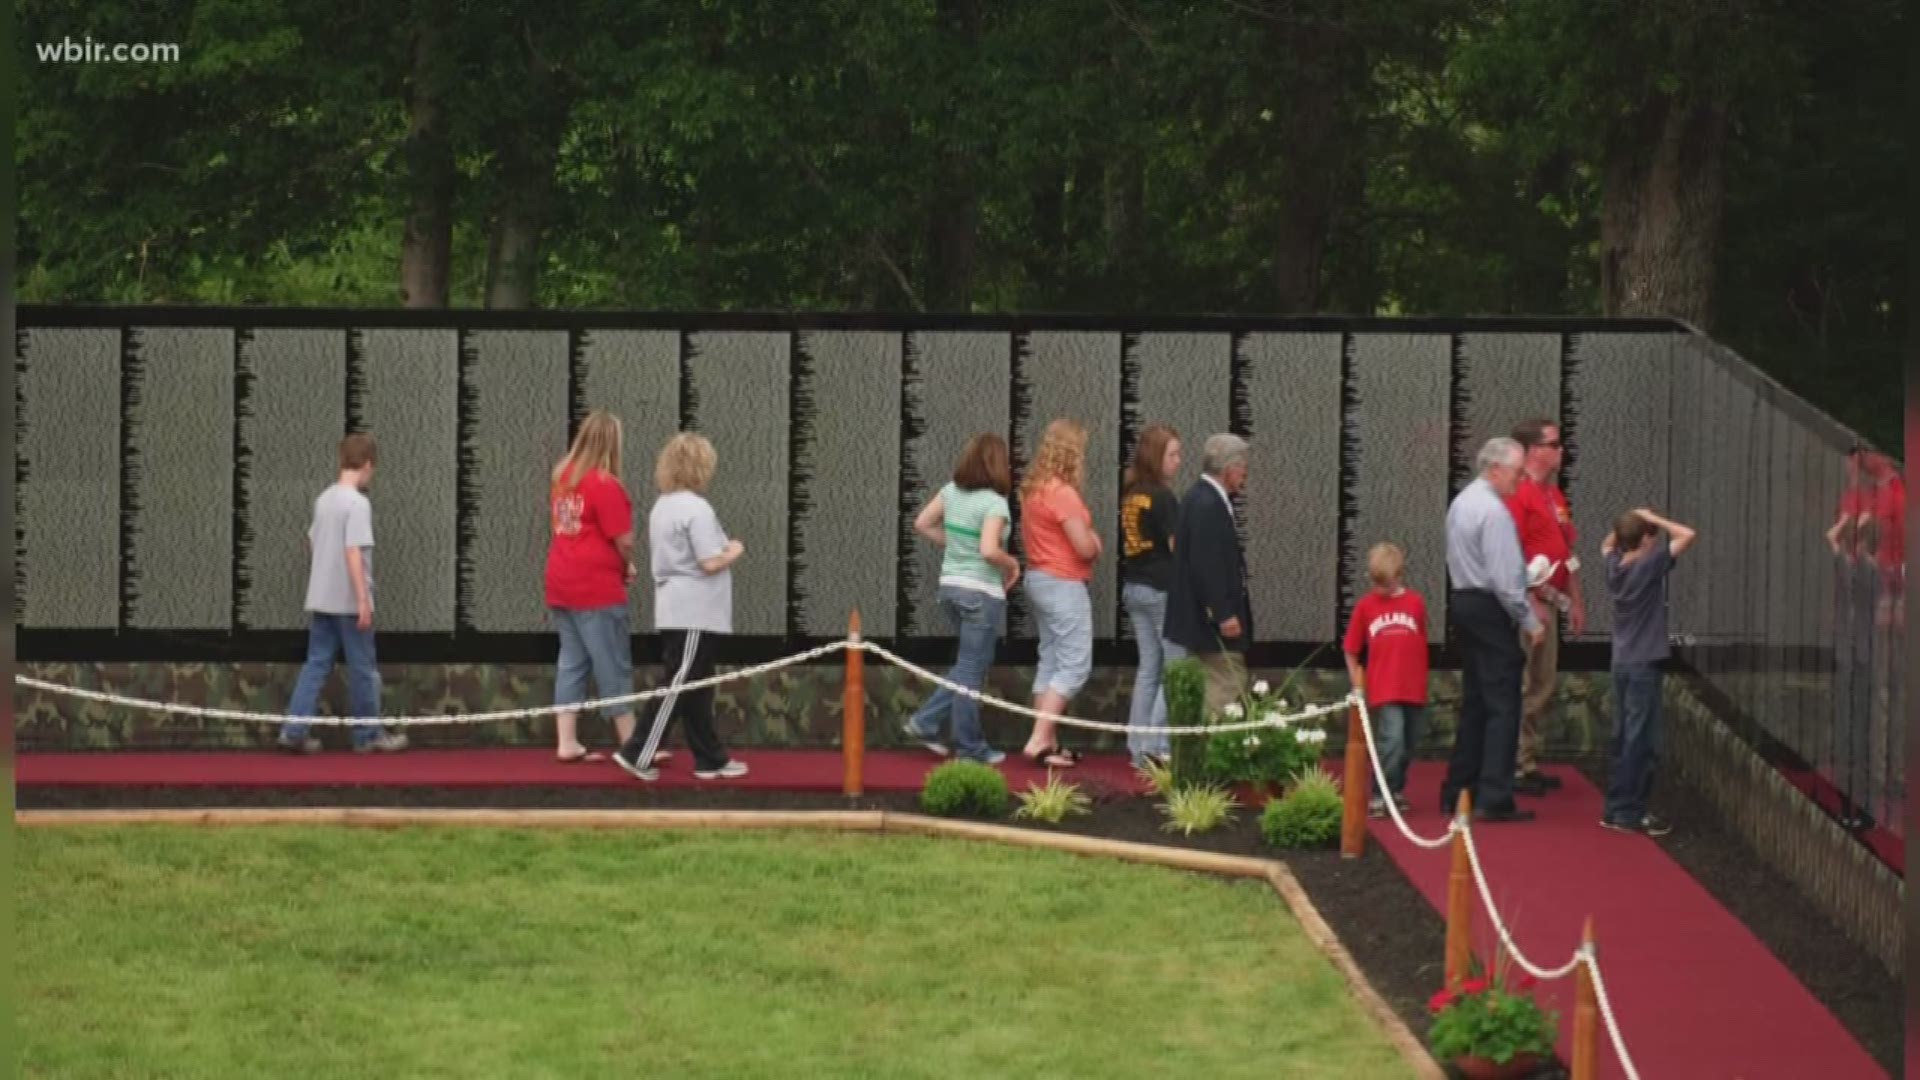 A Traveling Vietnam Veterans Memorial is in Morristown this week. It's been touring the country for more than 30 years.